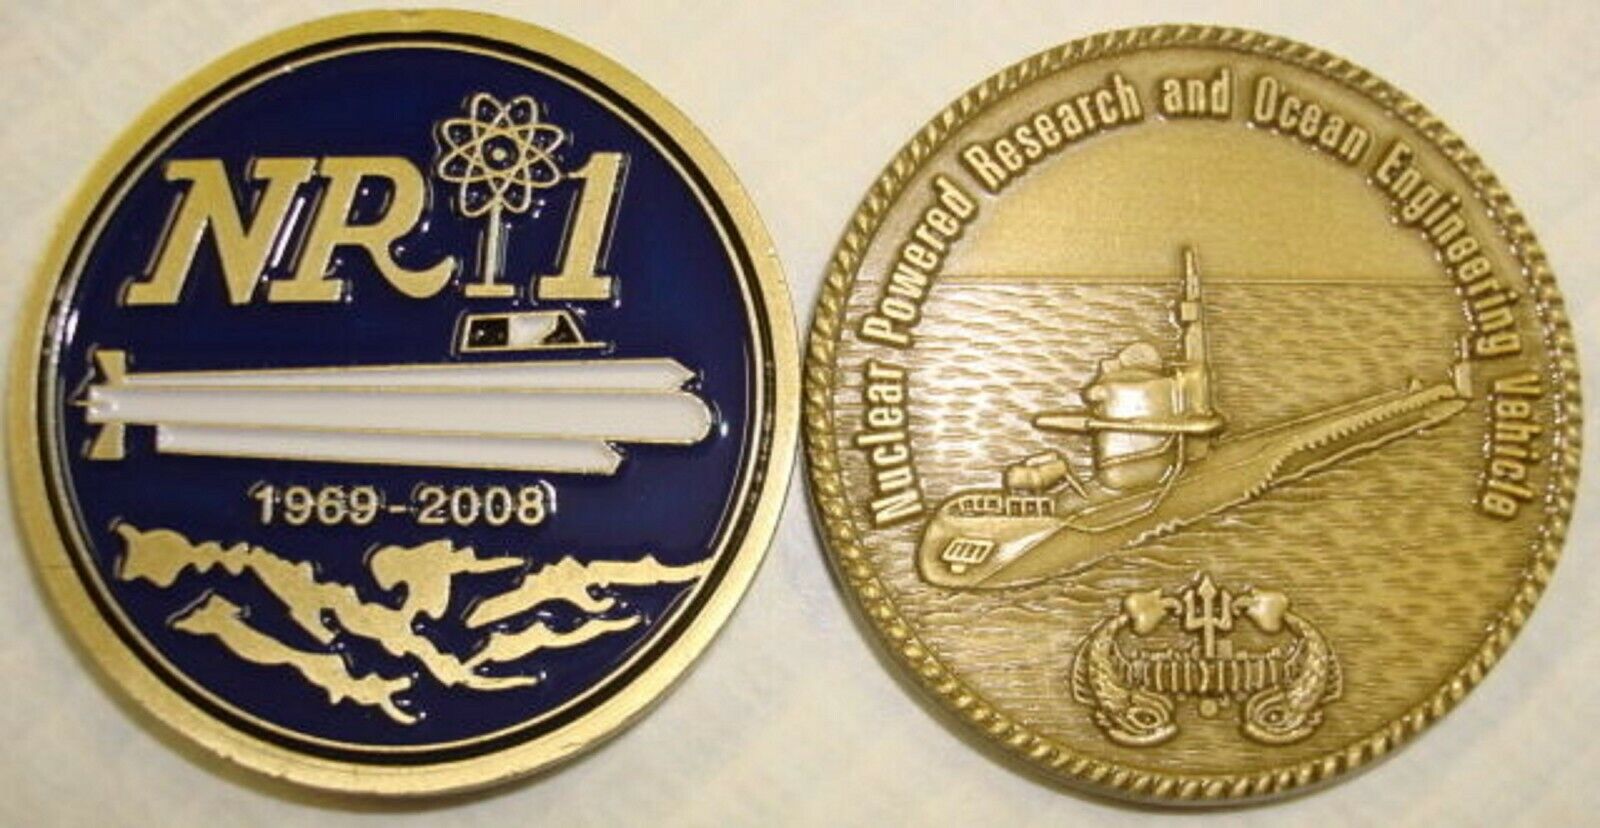 NAVY NR-1 SUBMERSIBLE RESEARCH SUBMARINE CHALLENGE COIN